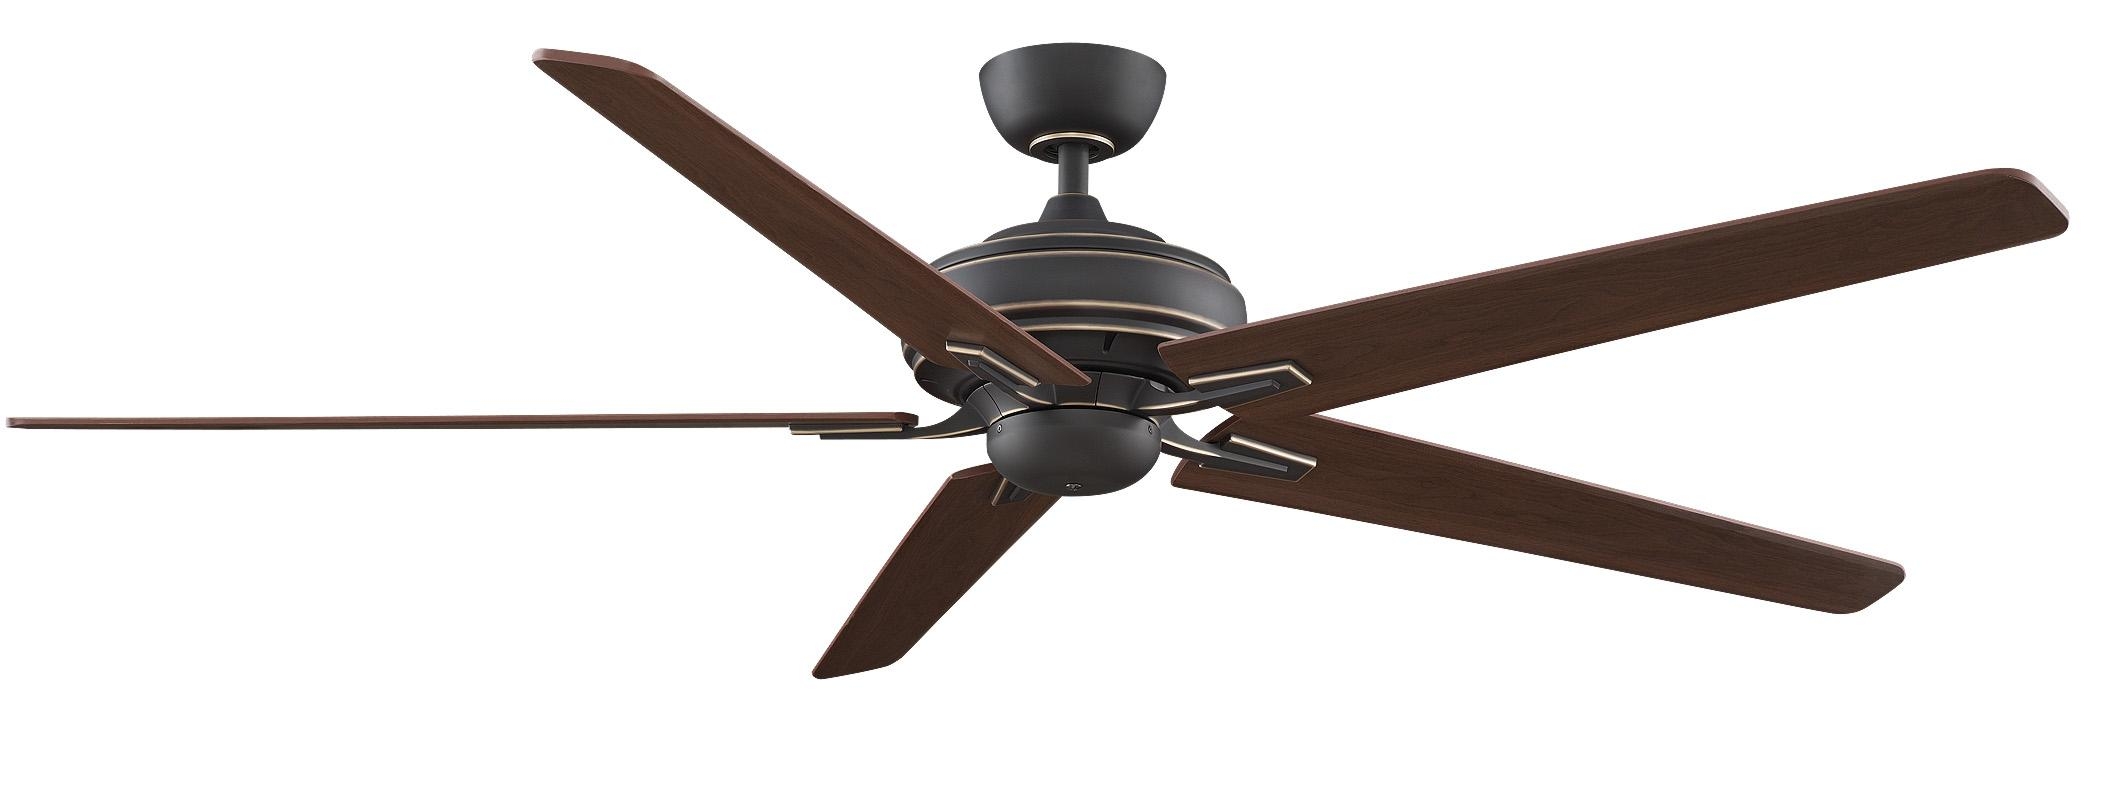 Best Outdoor Ceiling Fans Without Lights2101 X 794